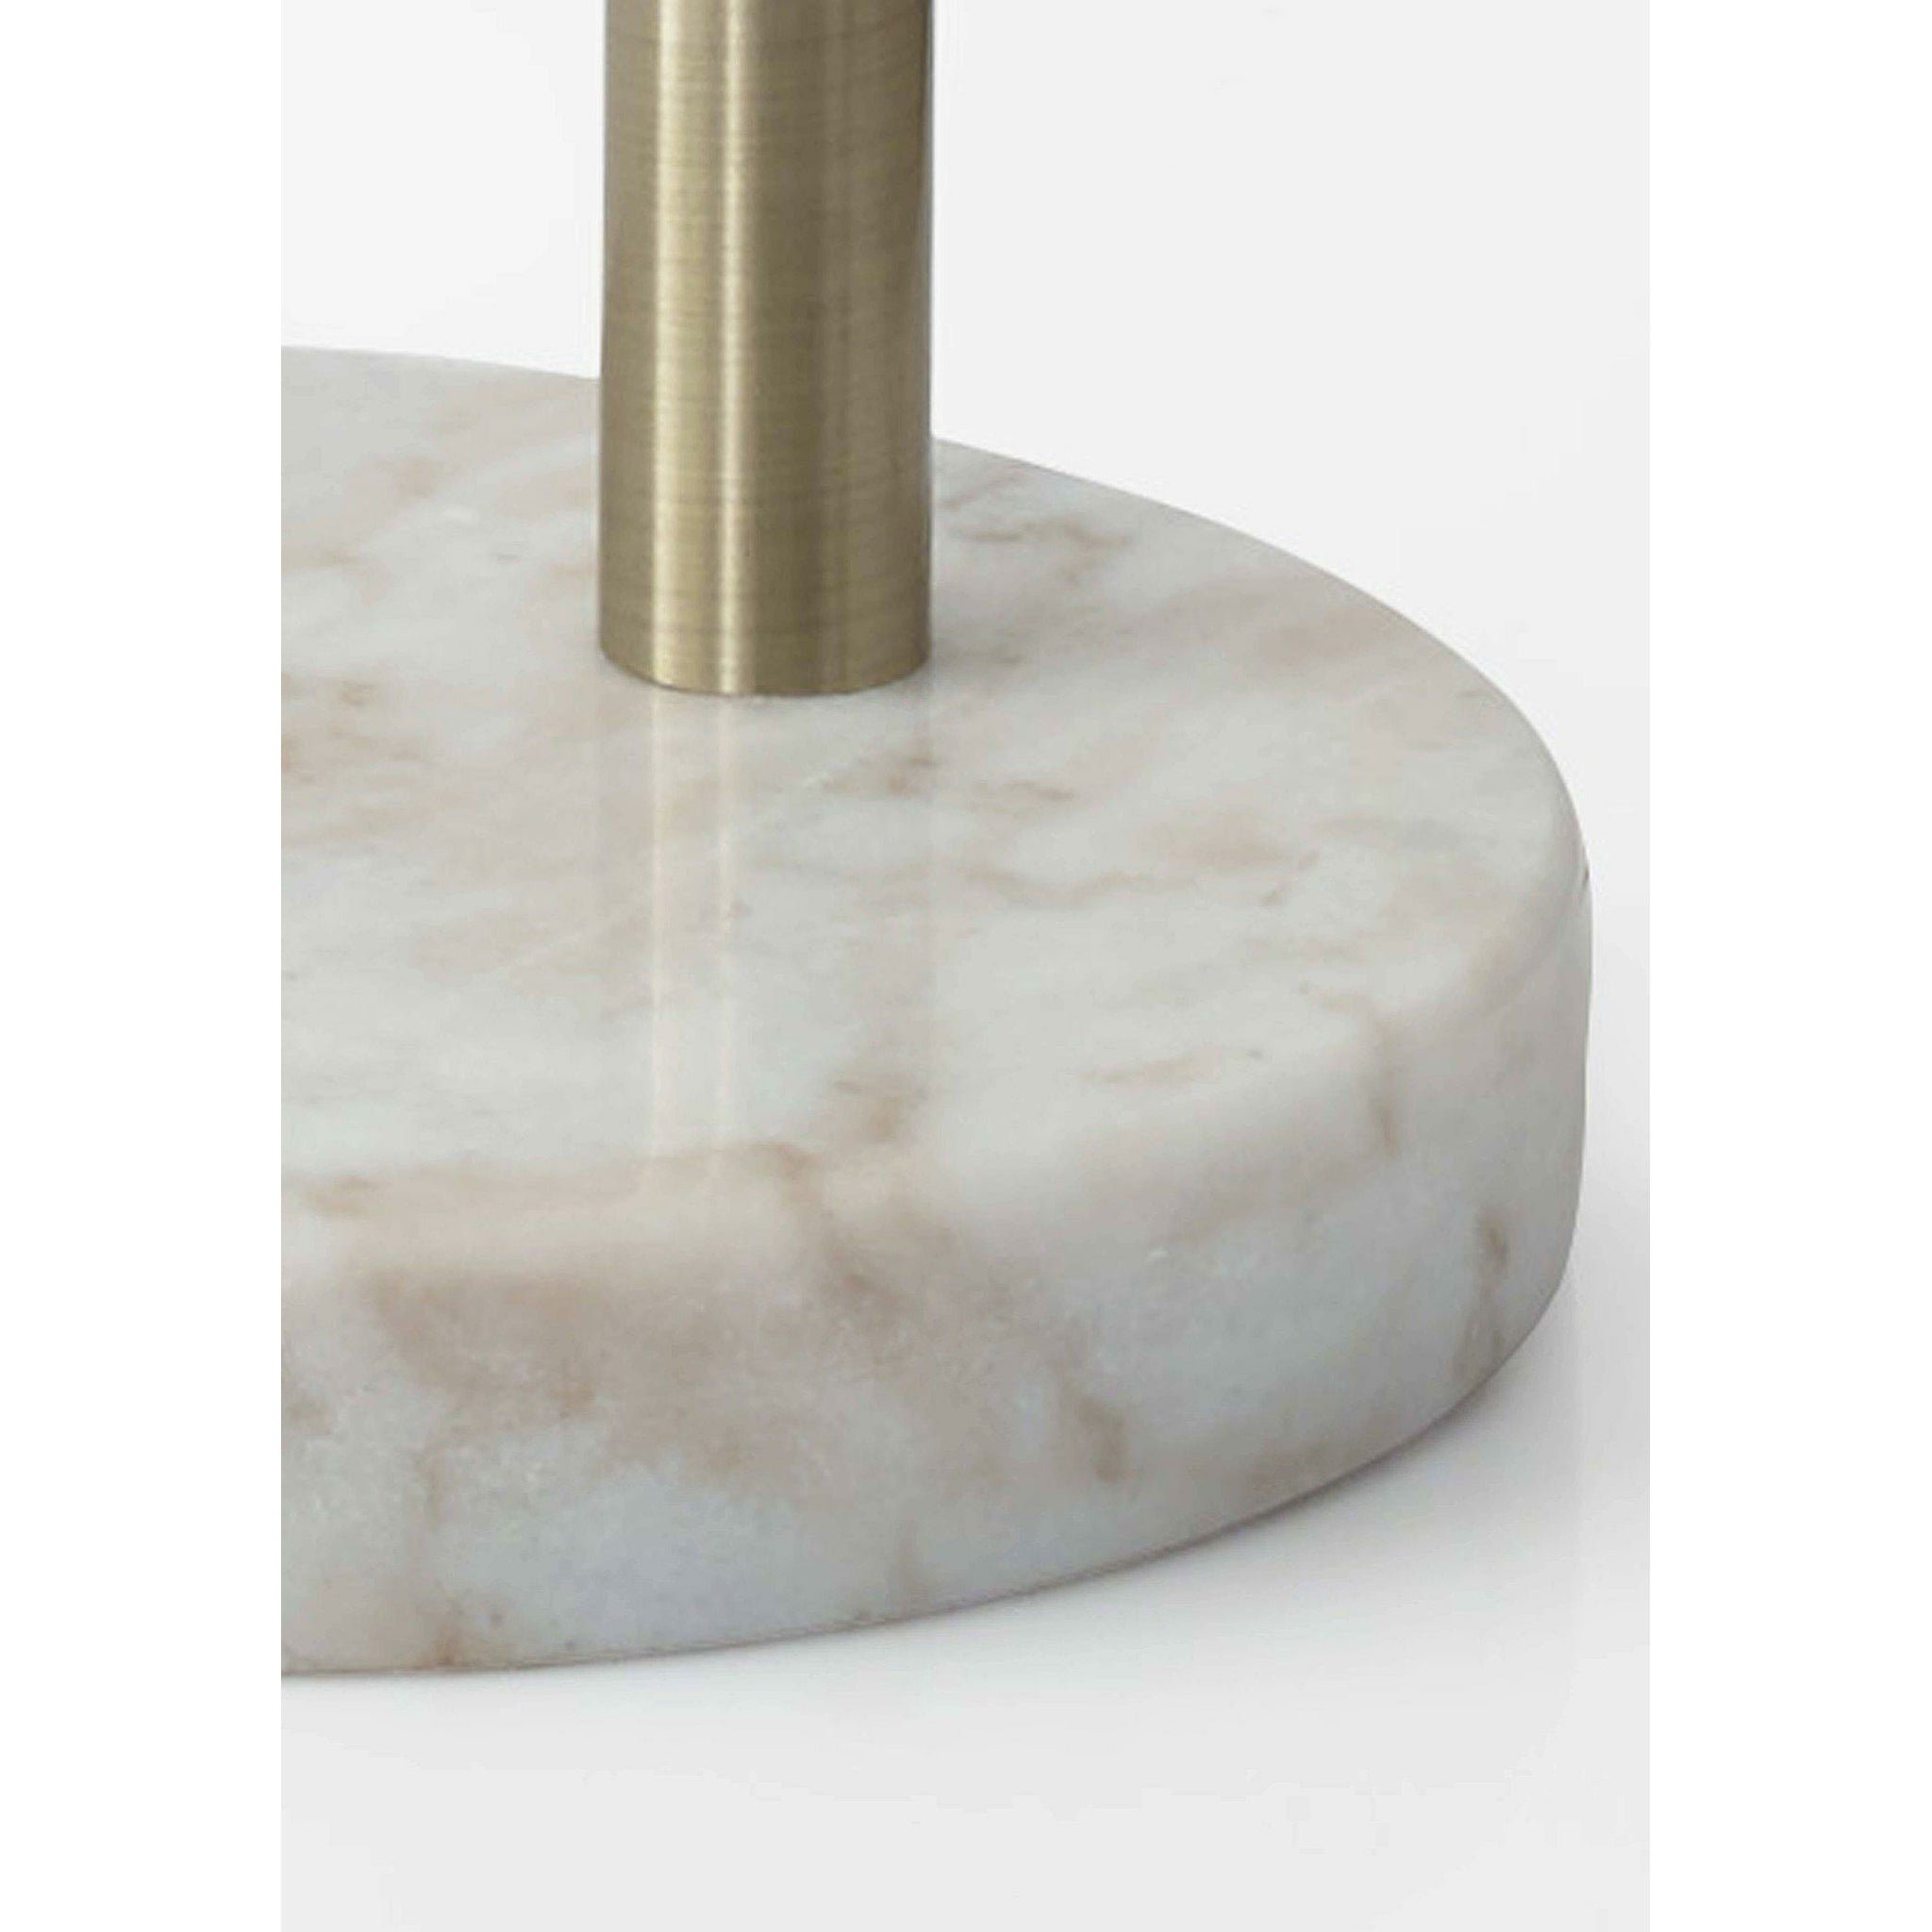 Bowery Collection Floor Lamp